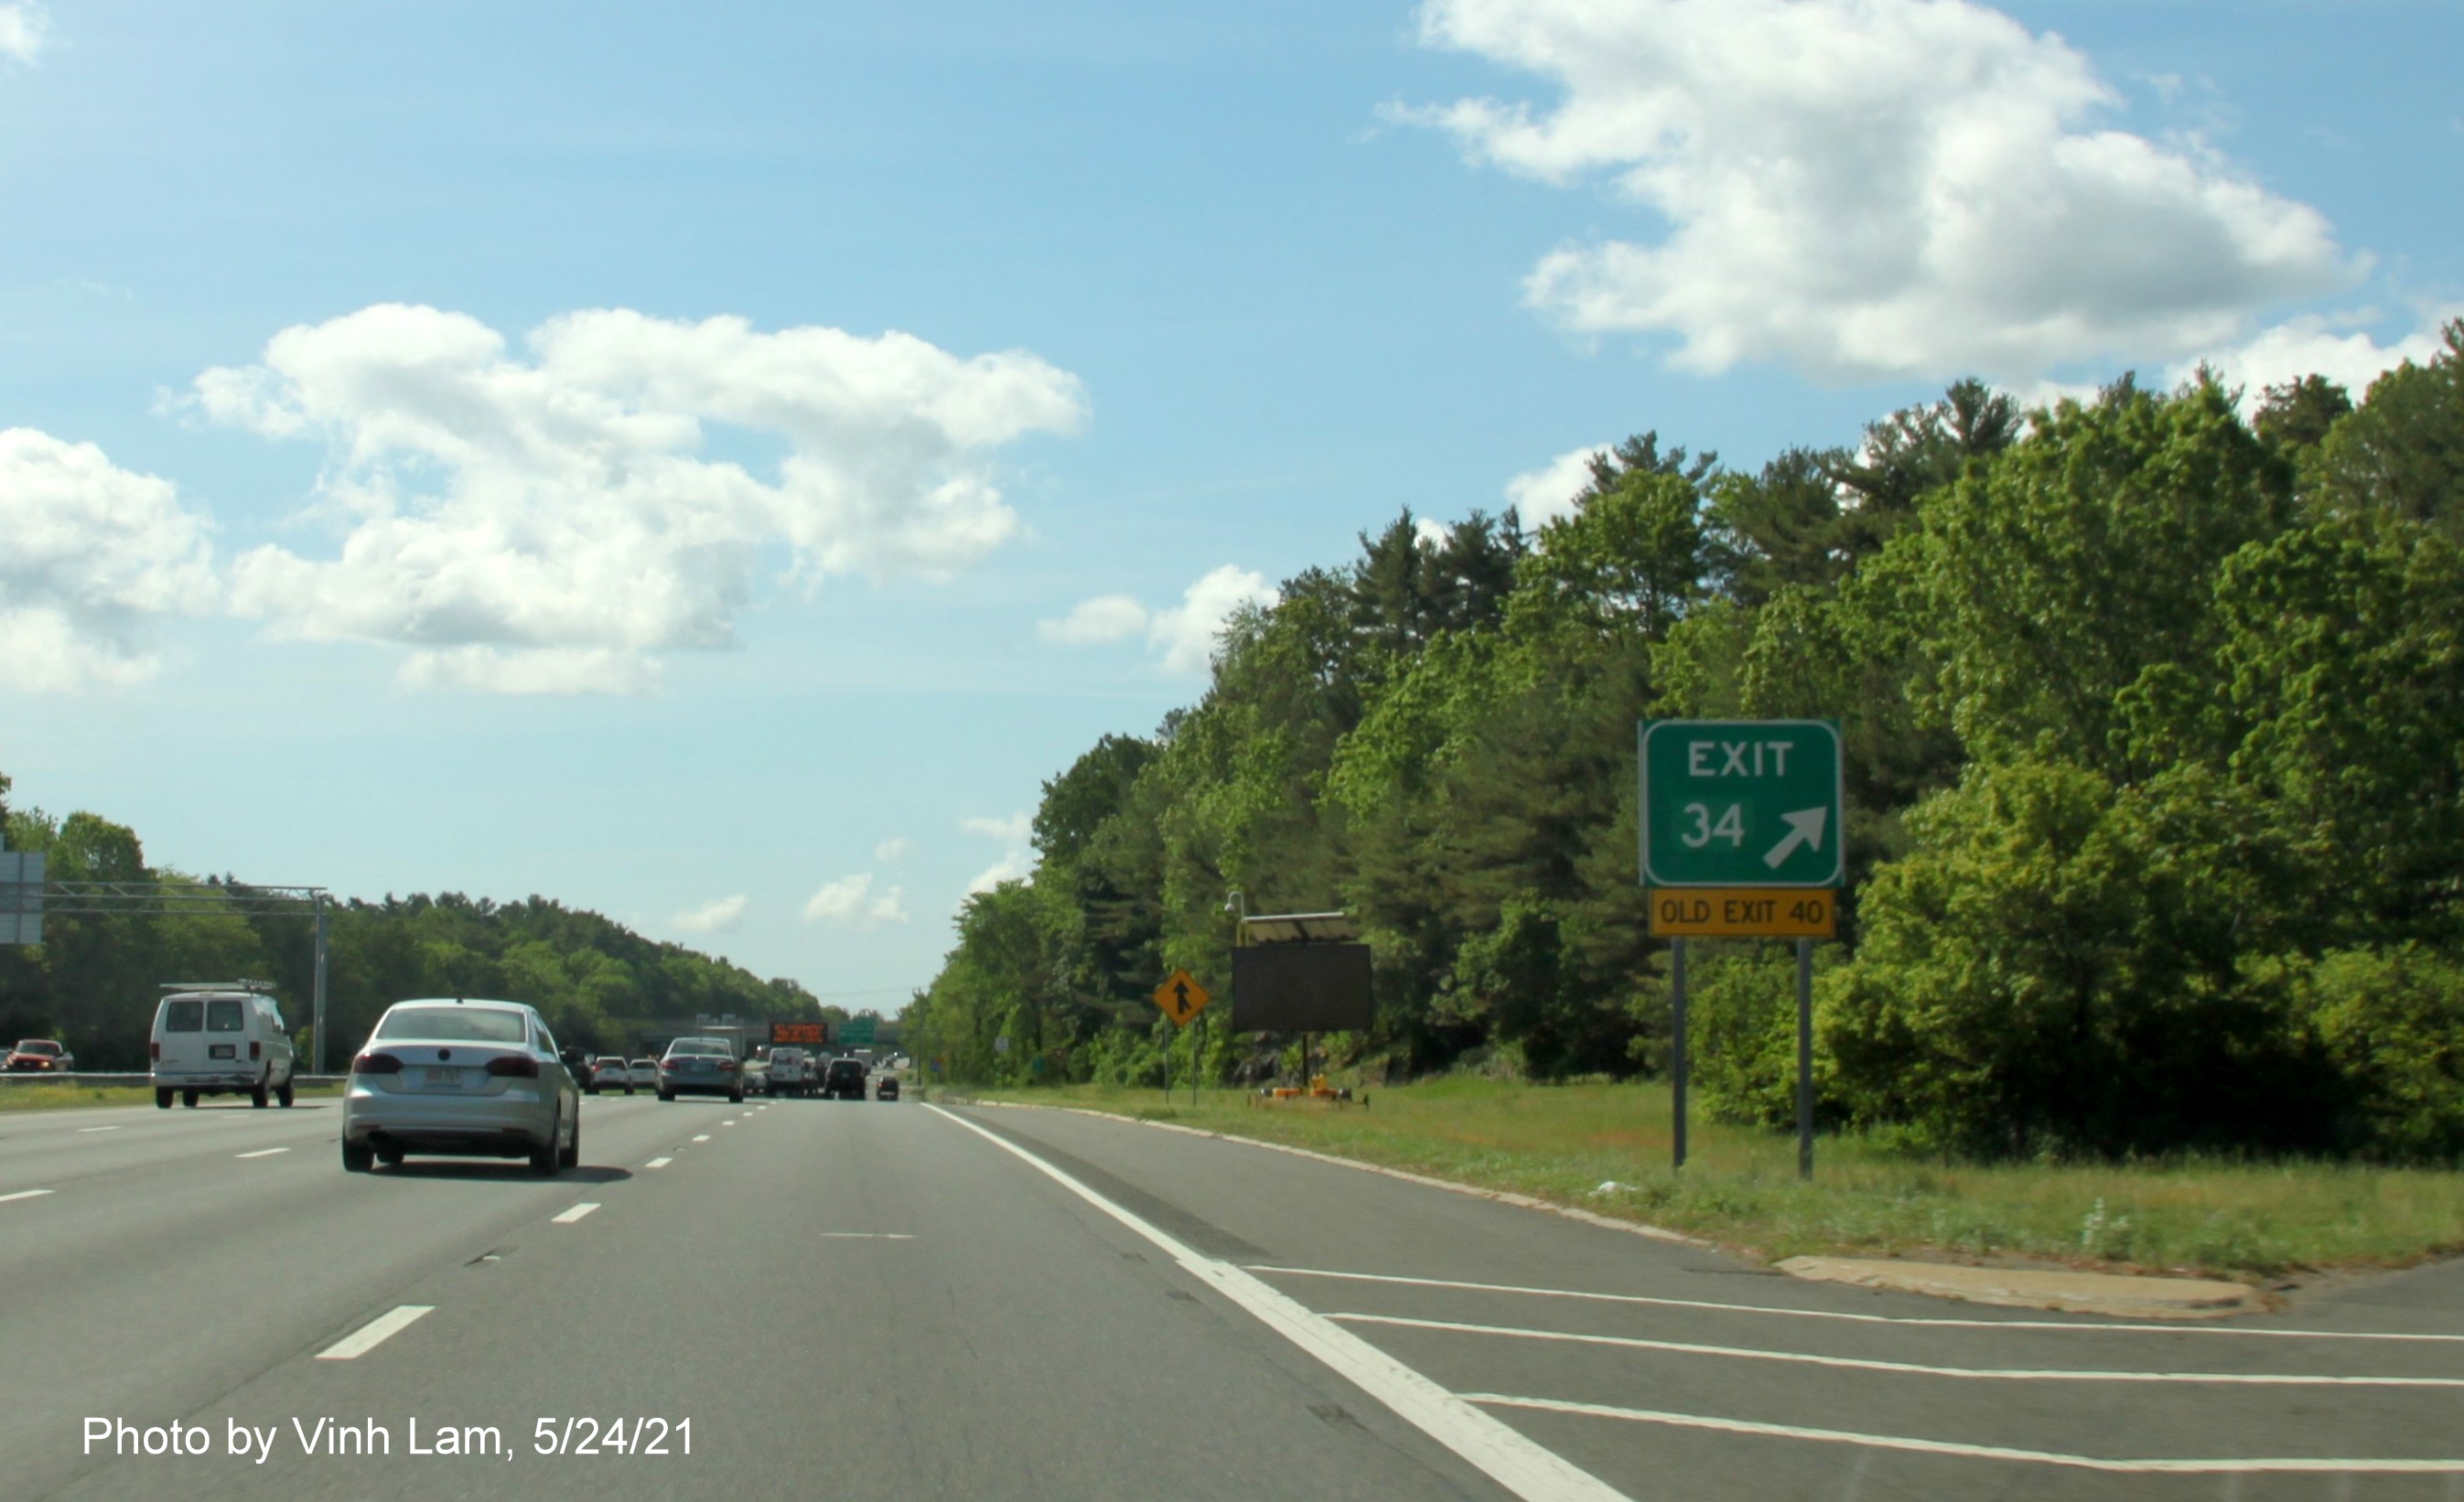 Image of gore sign for MA 62 exit with new milepost based exit number and yellow Old Exit 40 sign attached below on I-93 South in Wilmington, by Vinh Lam, May 2021